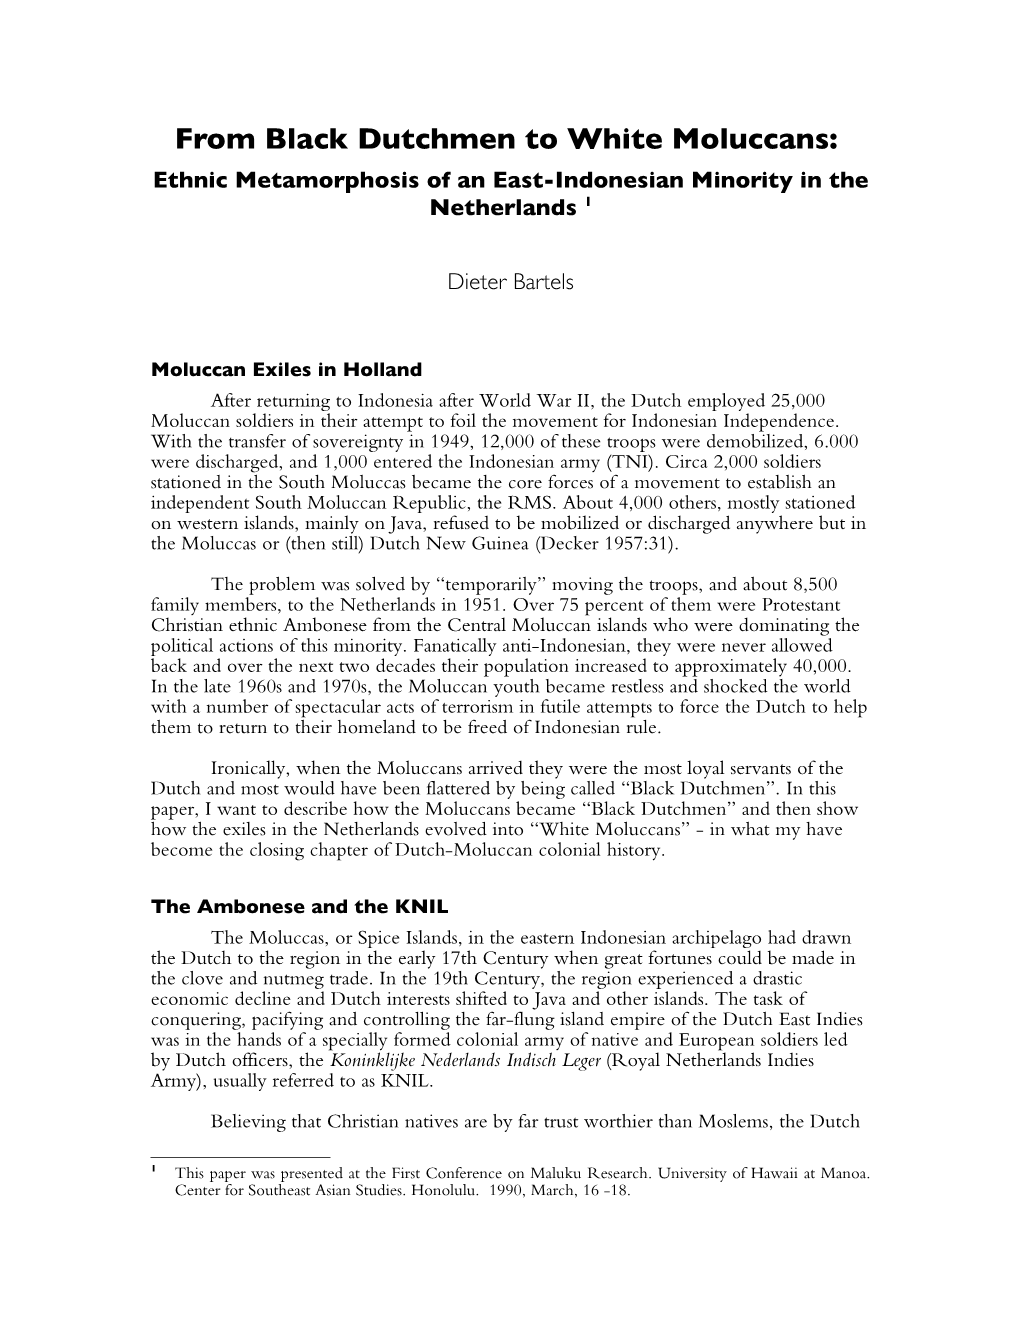 From Black Dutchmen to White Moluccans: Ethnic Metamorphosis of an East-Indonesian Minority in the Netherlands 1